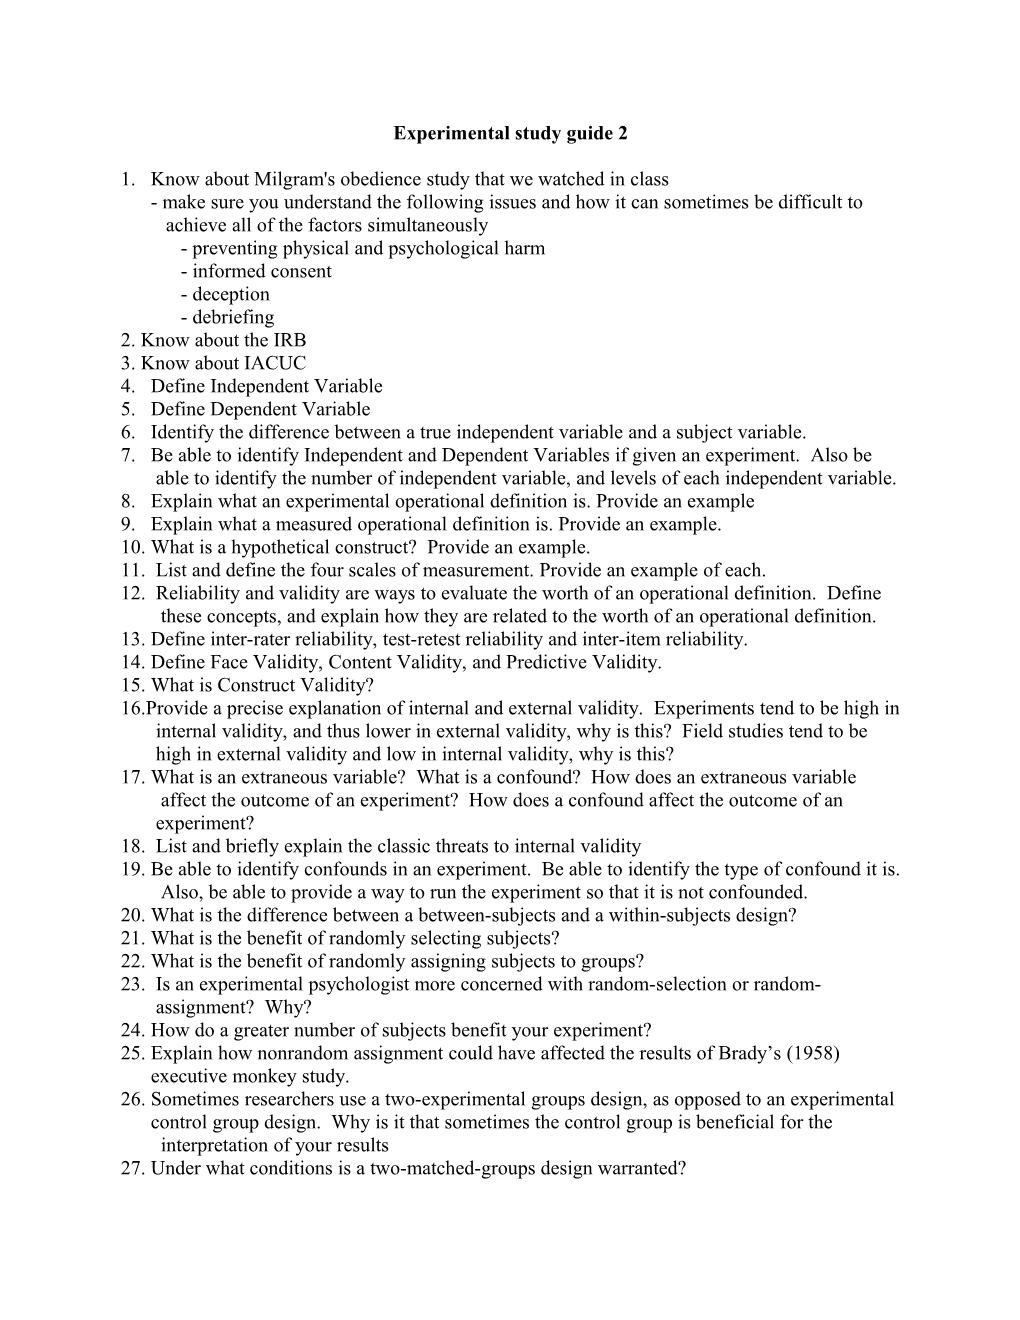 Experimental Study Guide 2